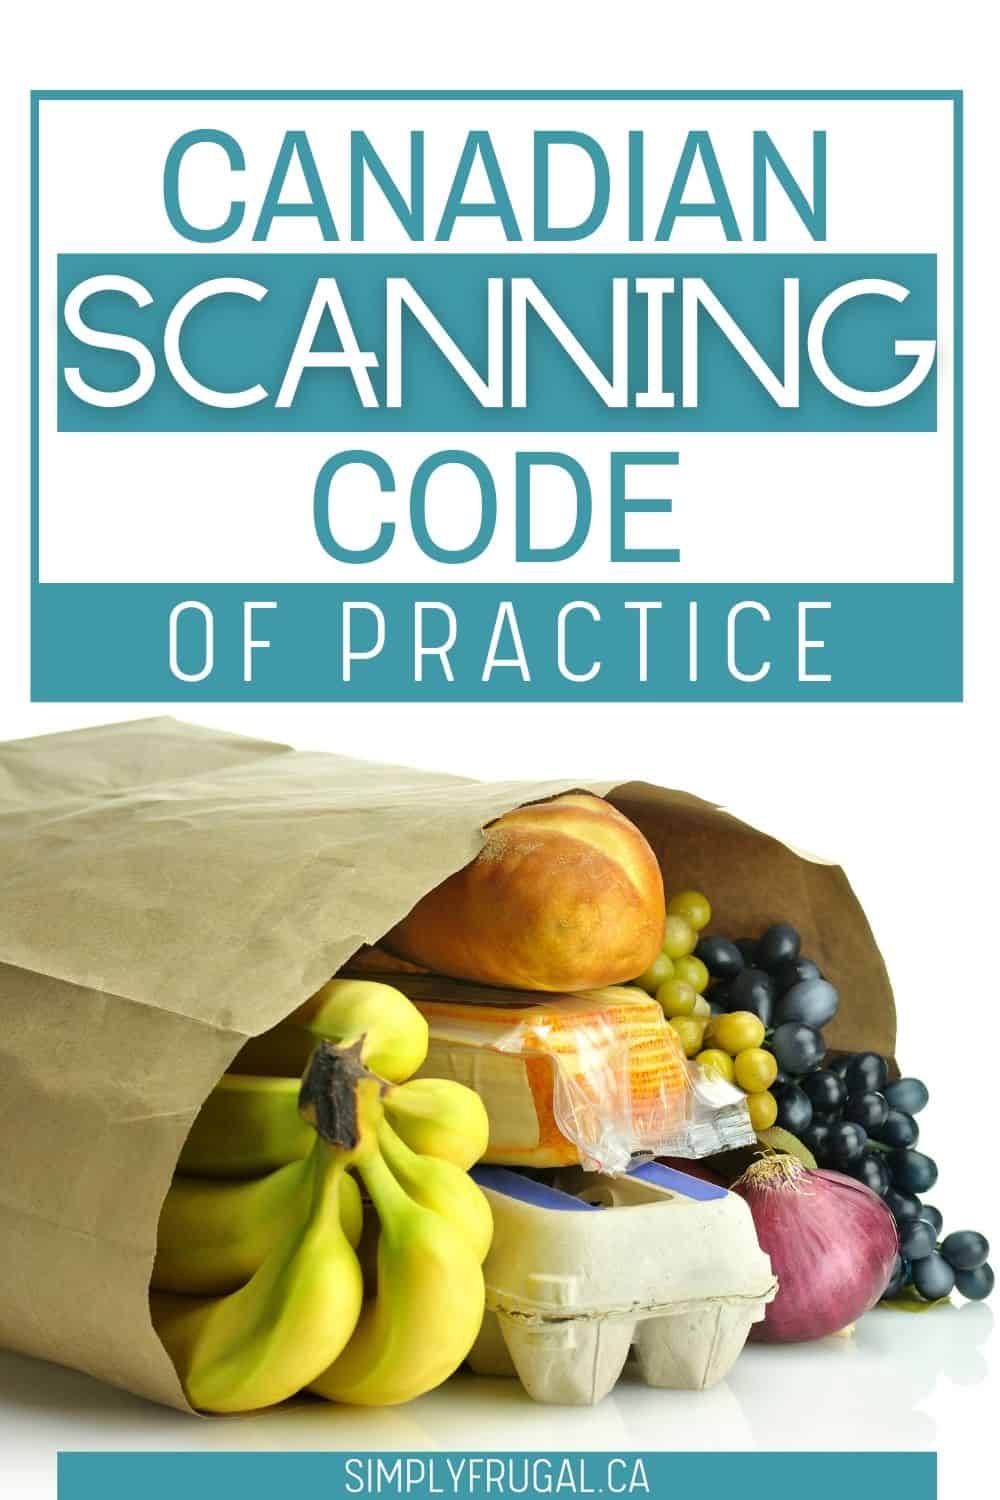 Scanner Price Accuracy Code Canada